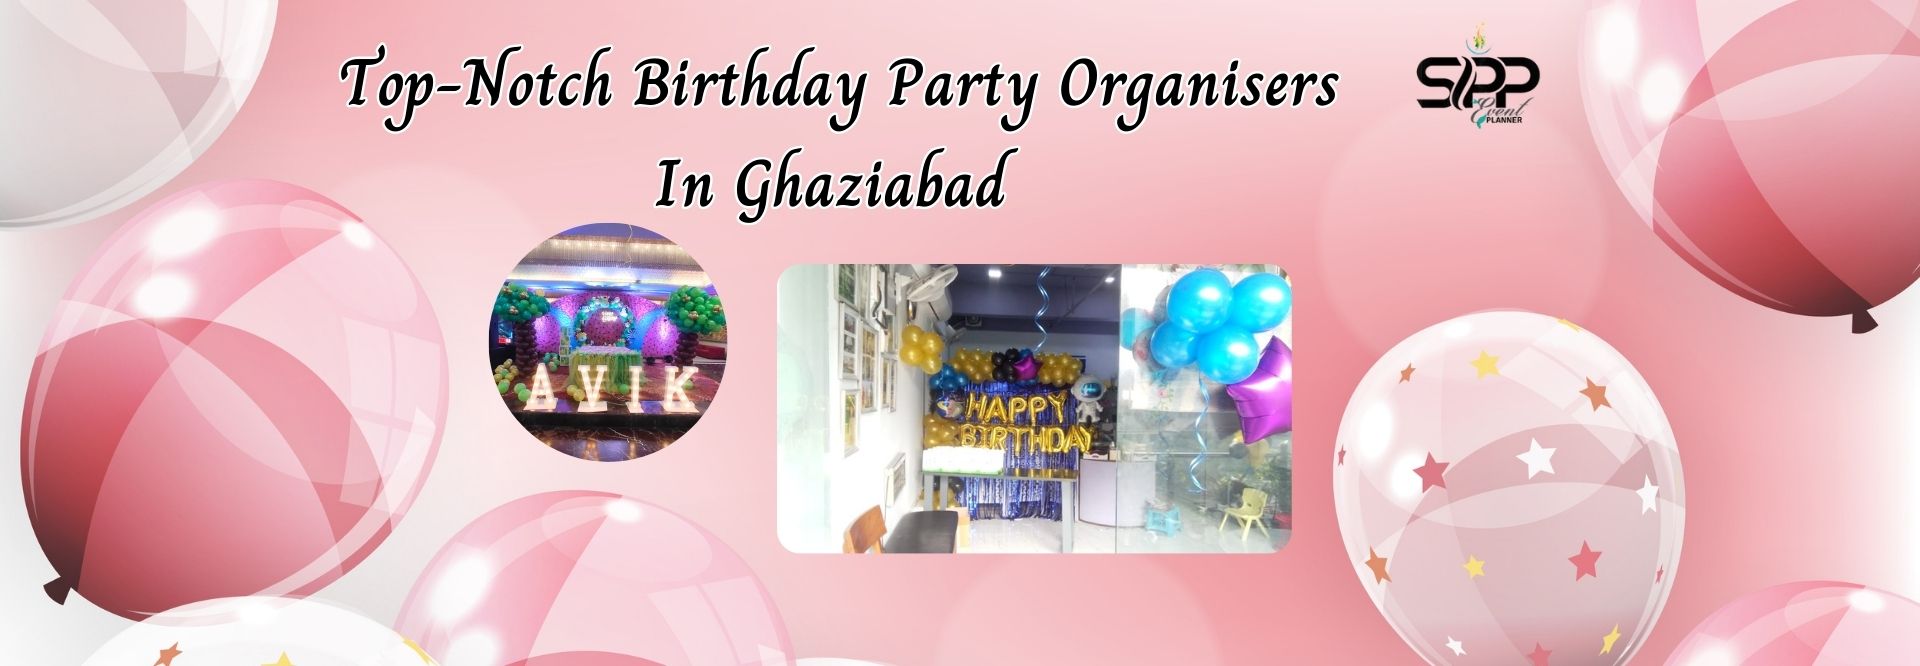 Top-Notch Birthday Party Organisers In Ghaziabad